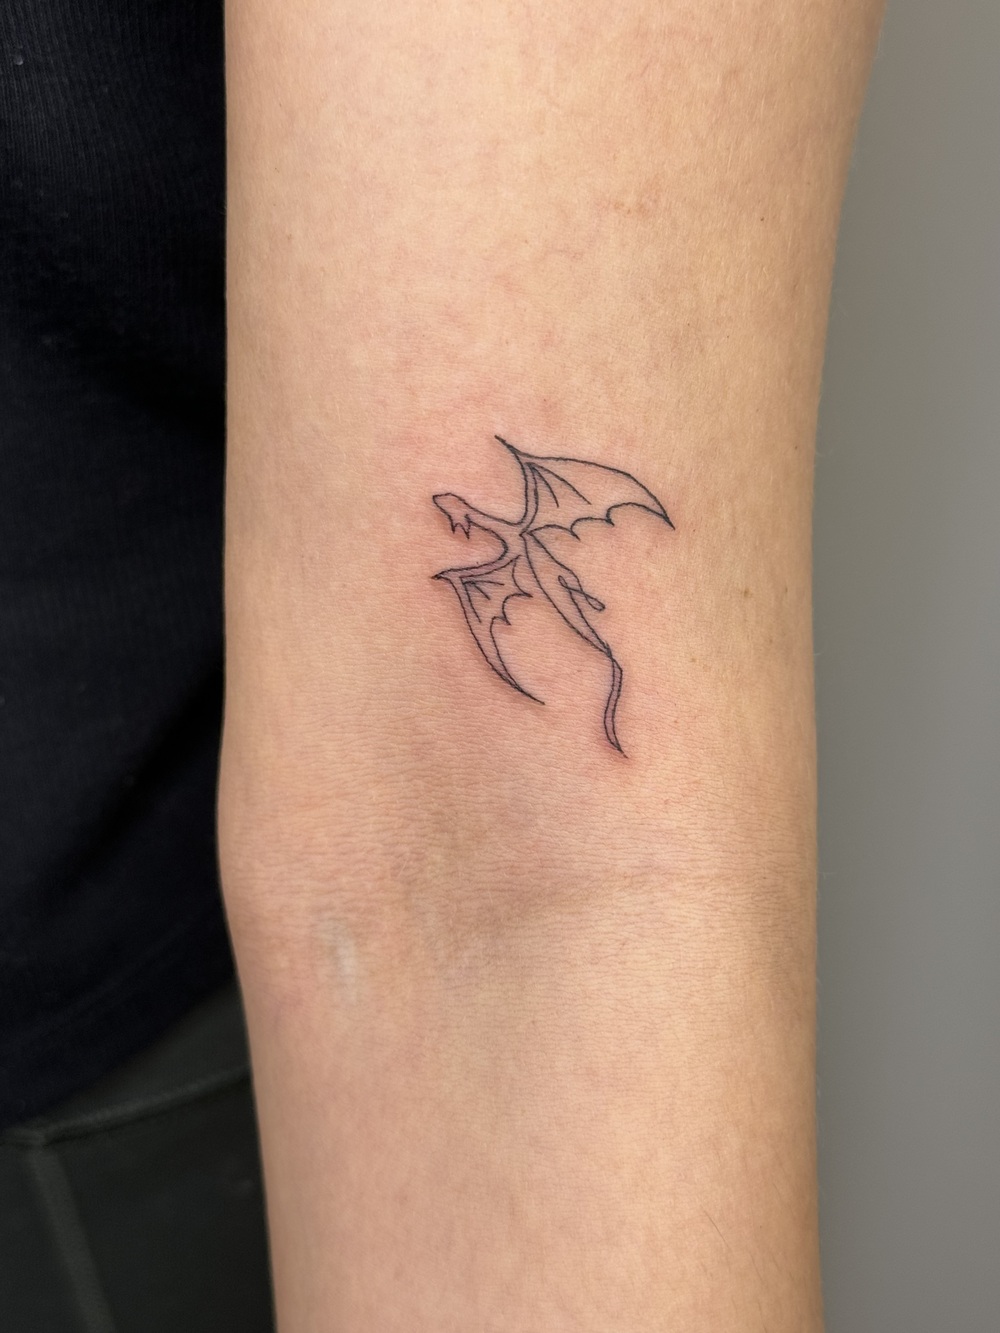 Super tiny dragon💜✨ - Tattoos and Art by Roni | Facebook